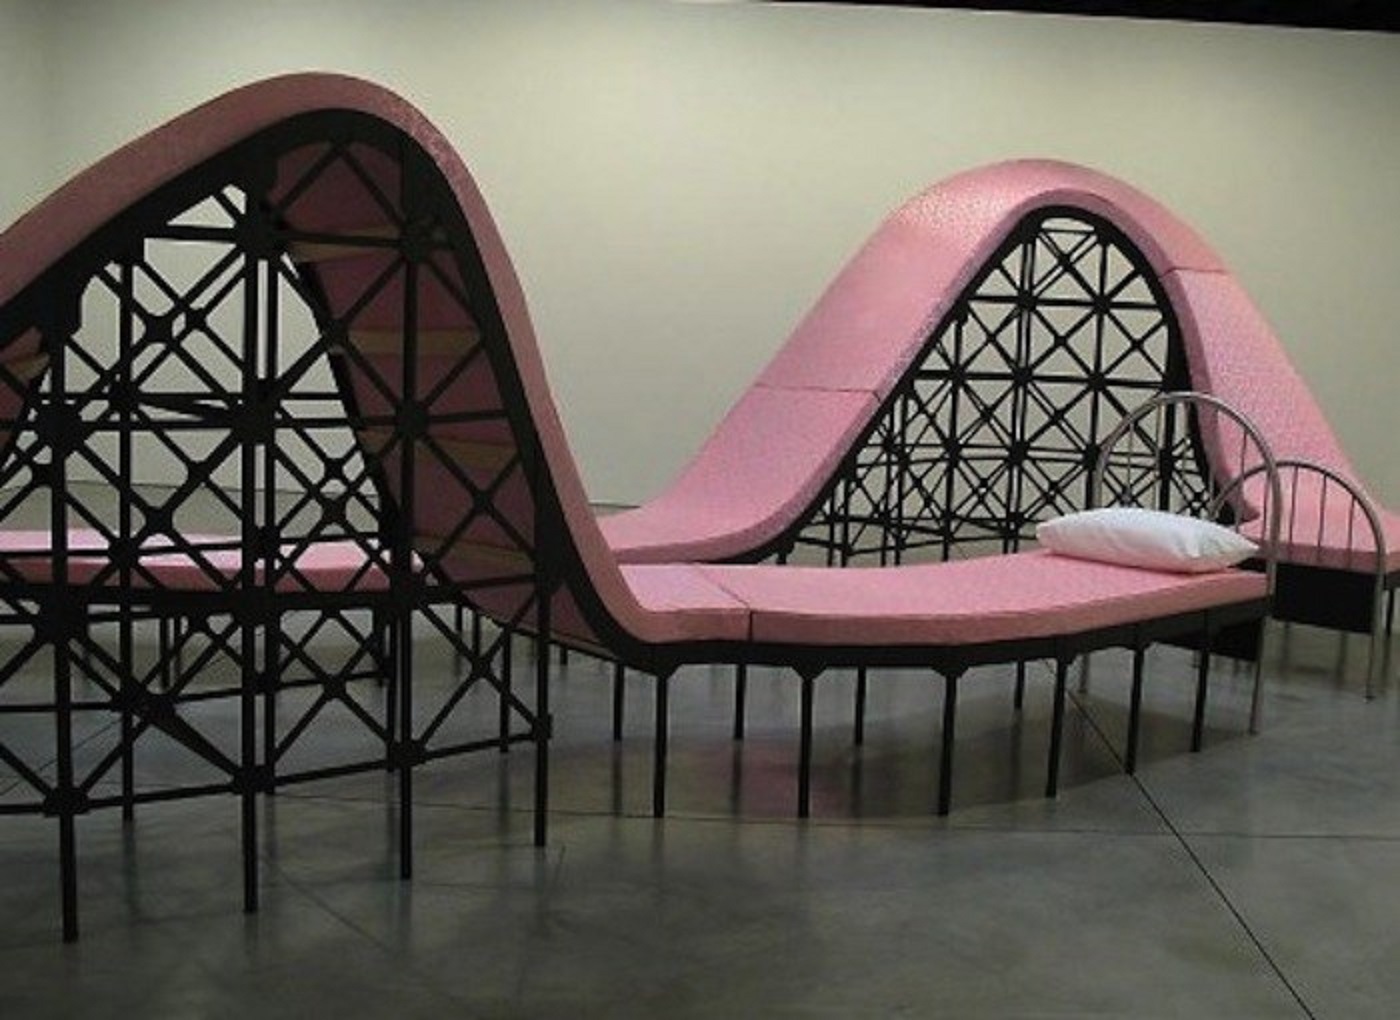 Or maybe your more into roller coasters. Try sleeping here while drunk